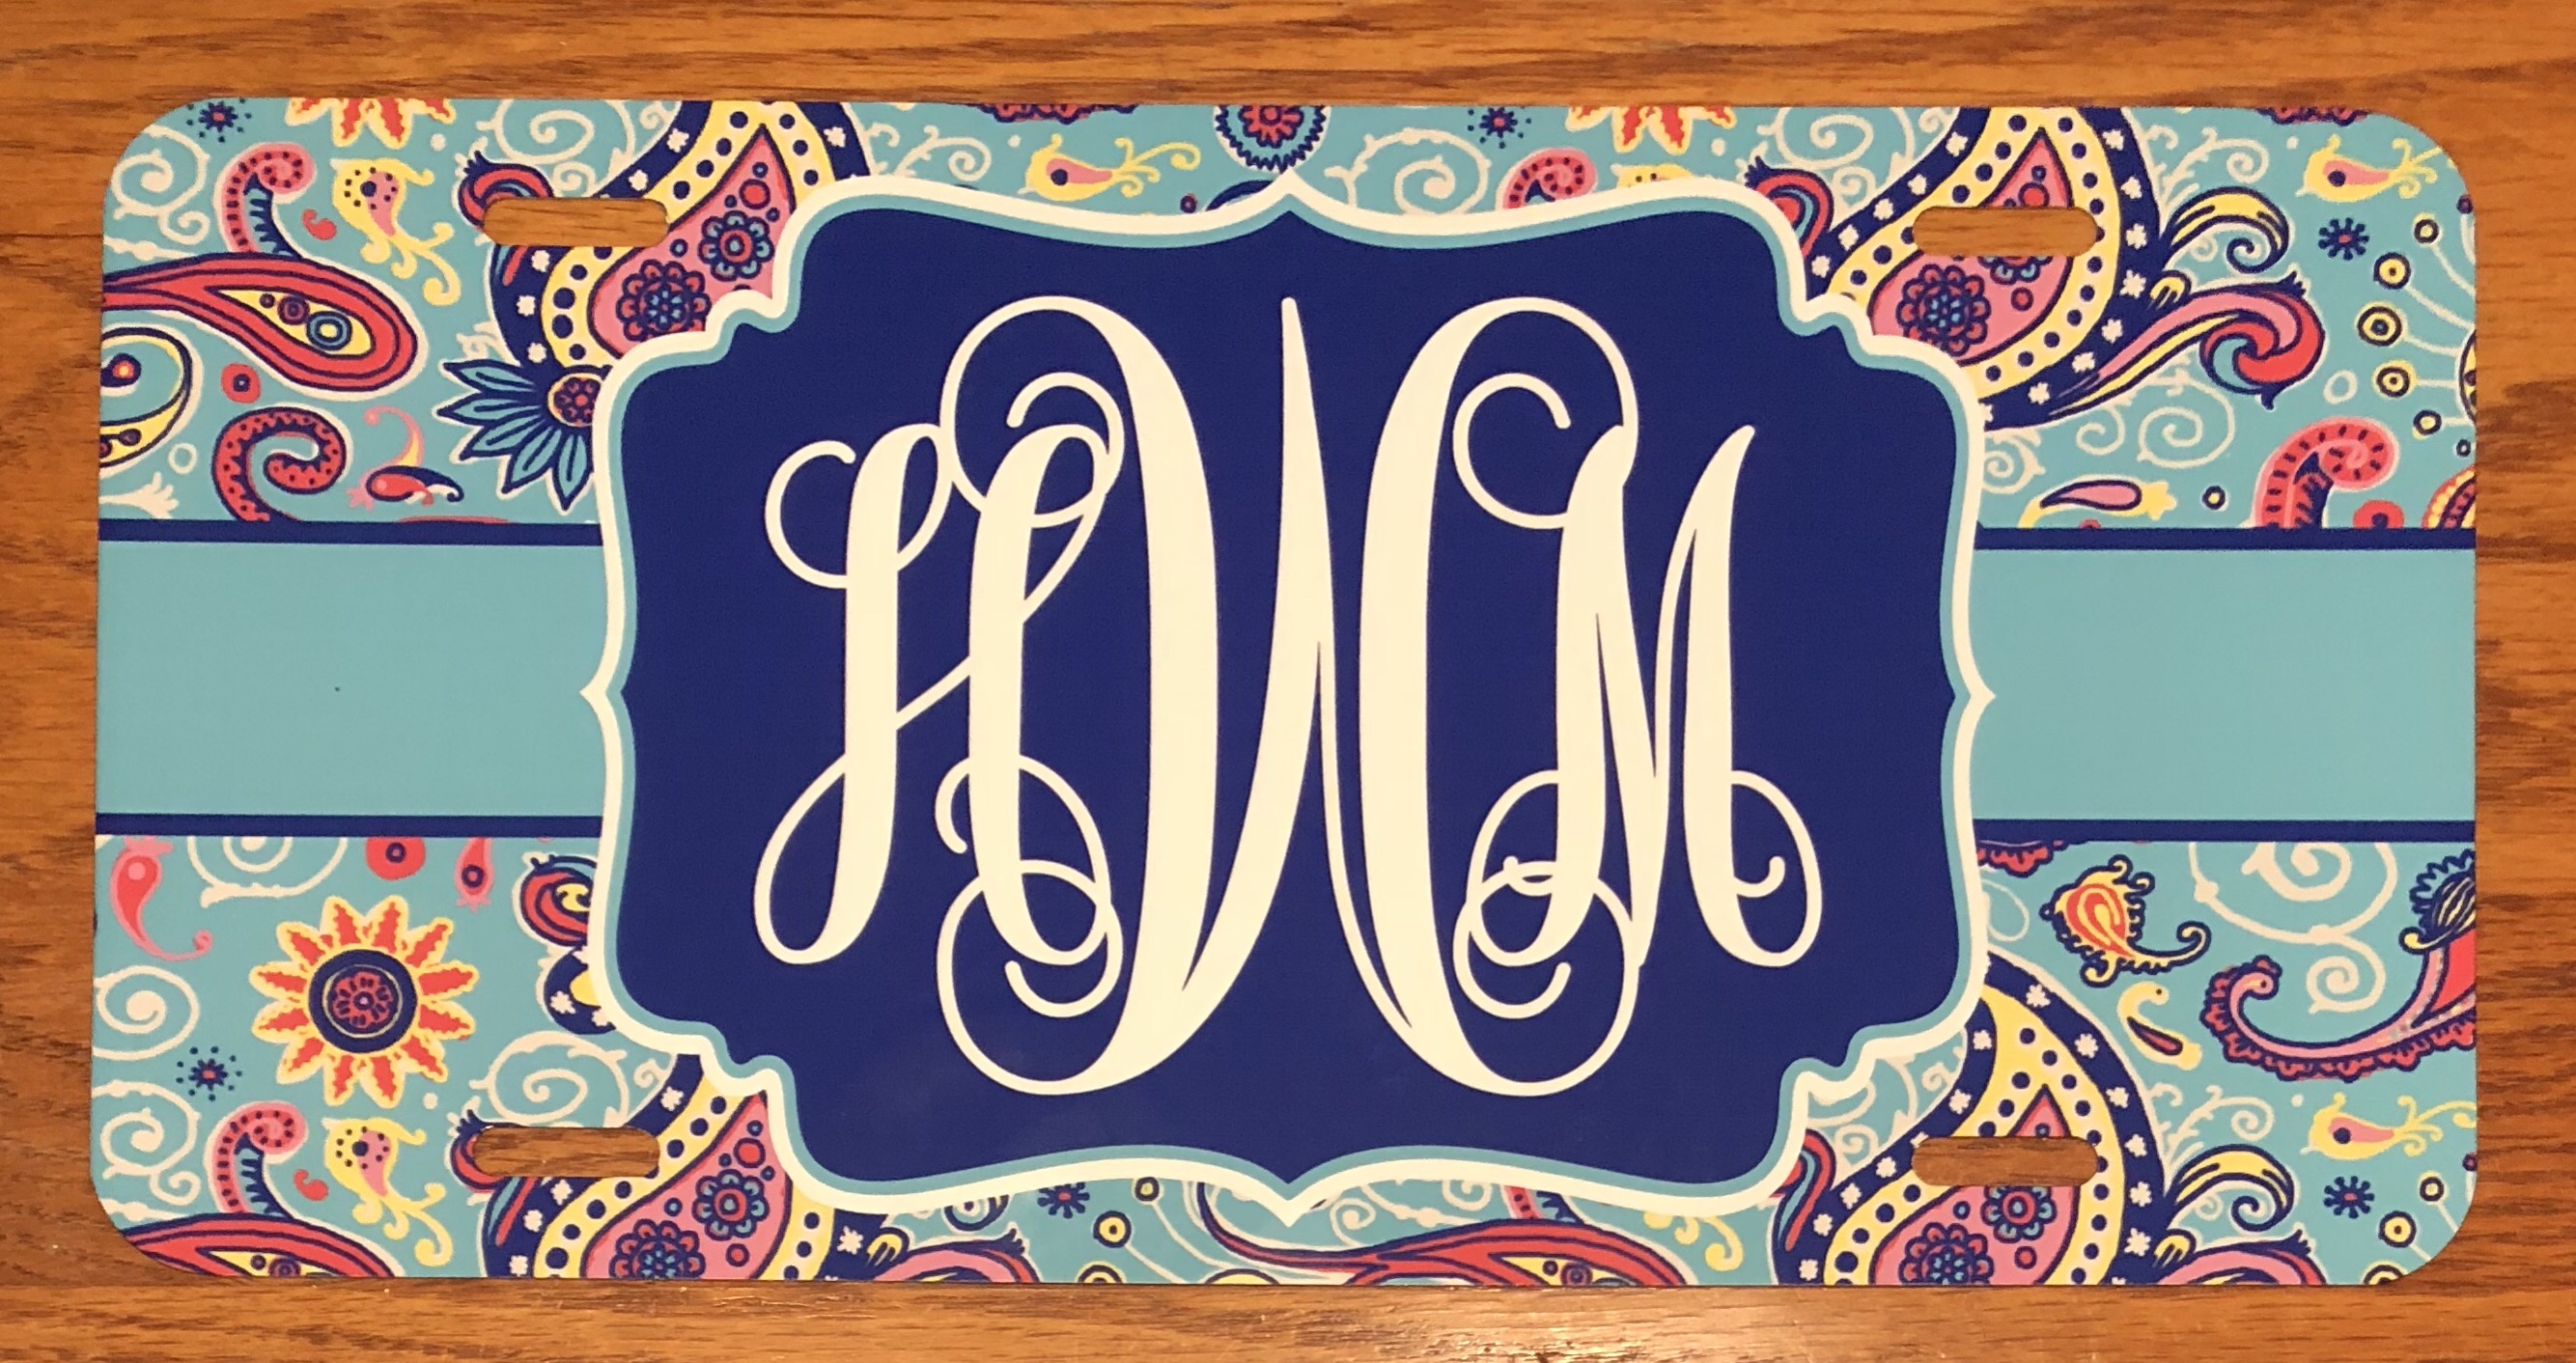 Monogram license plate made with sublimation printing